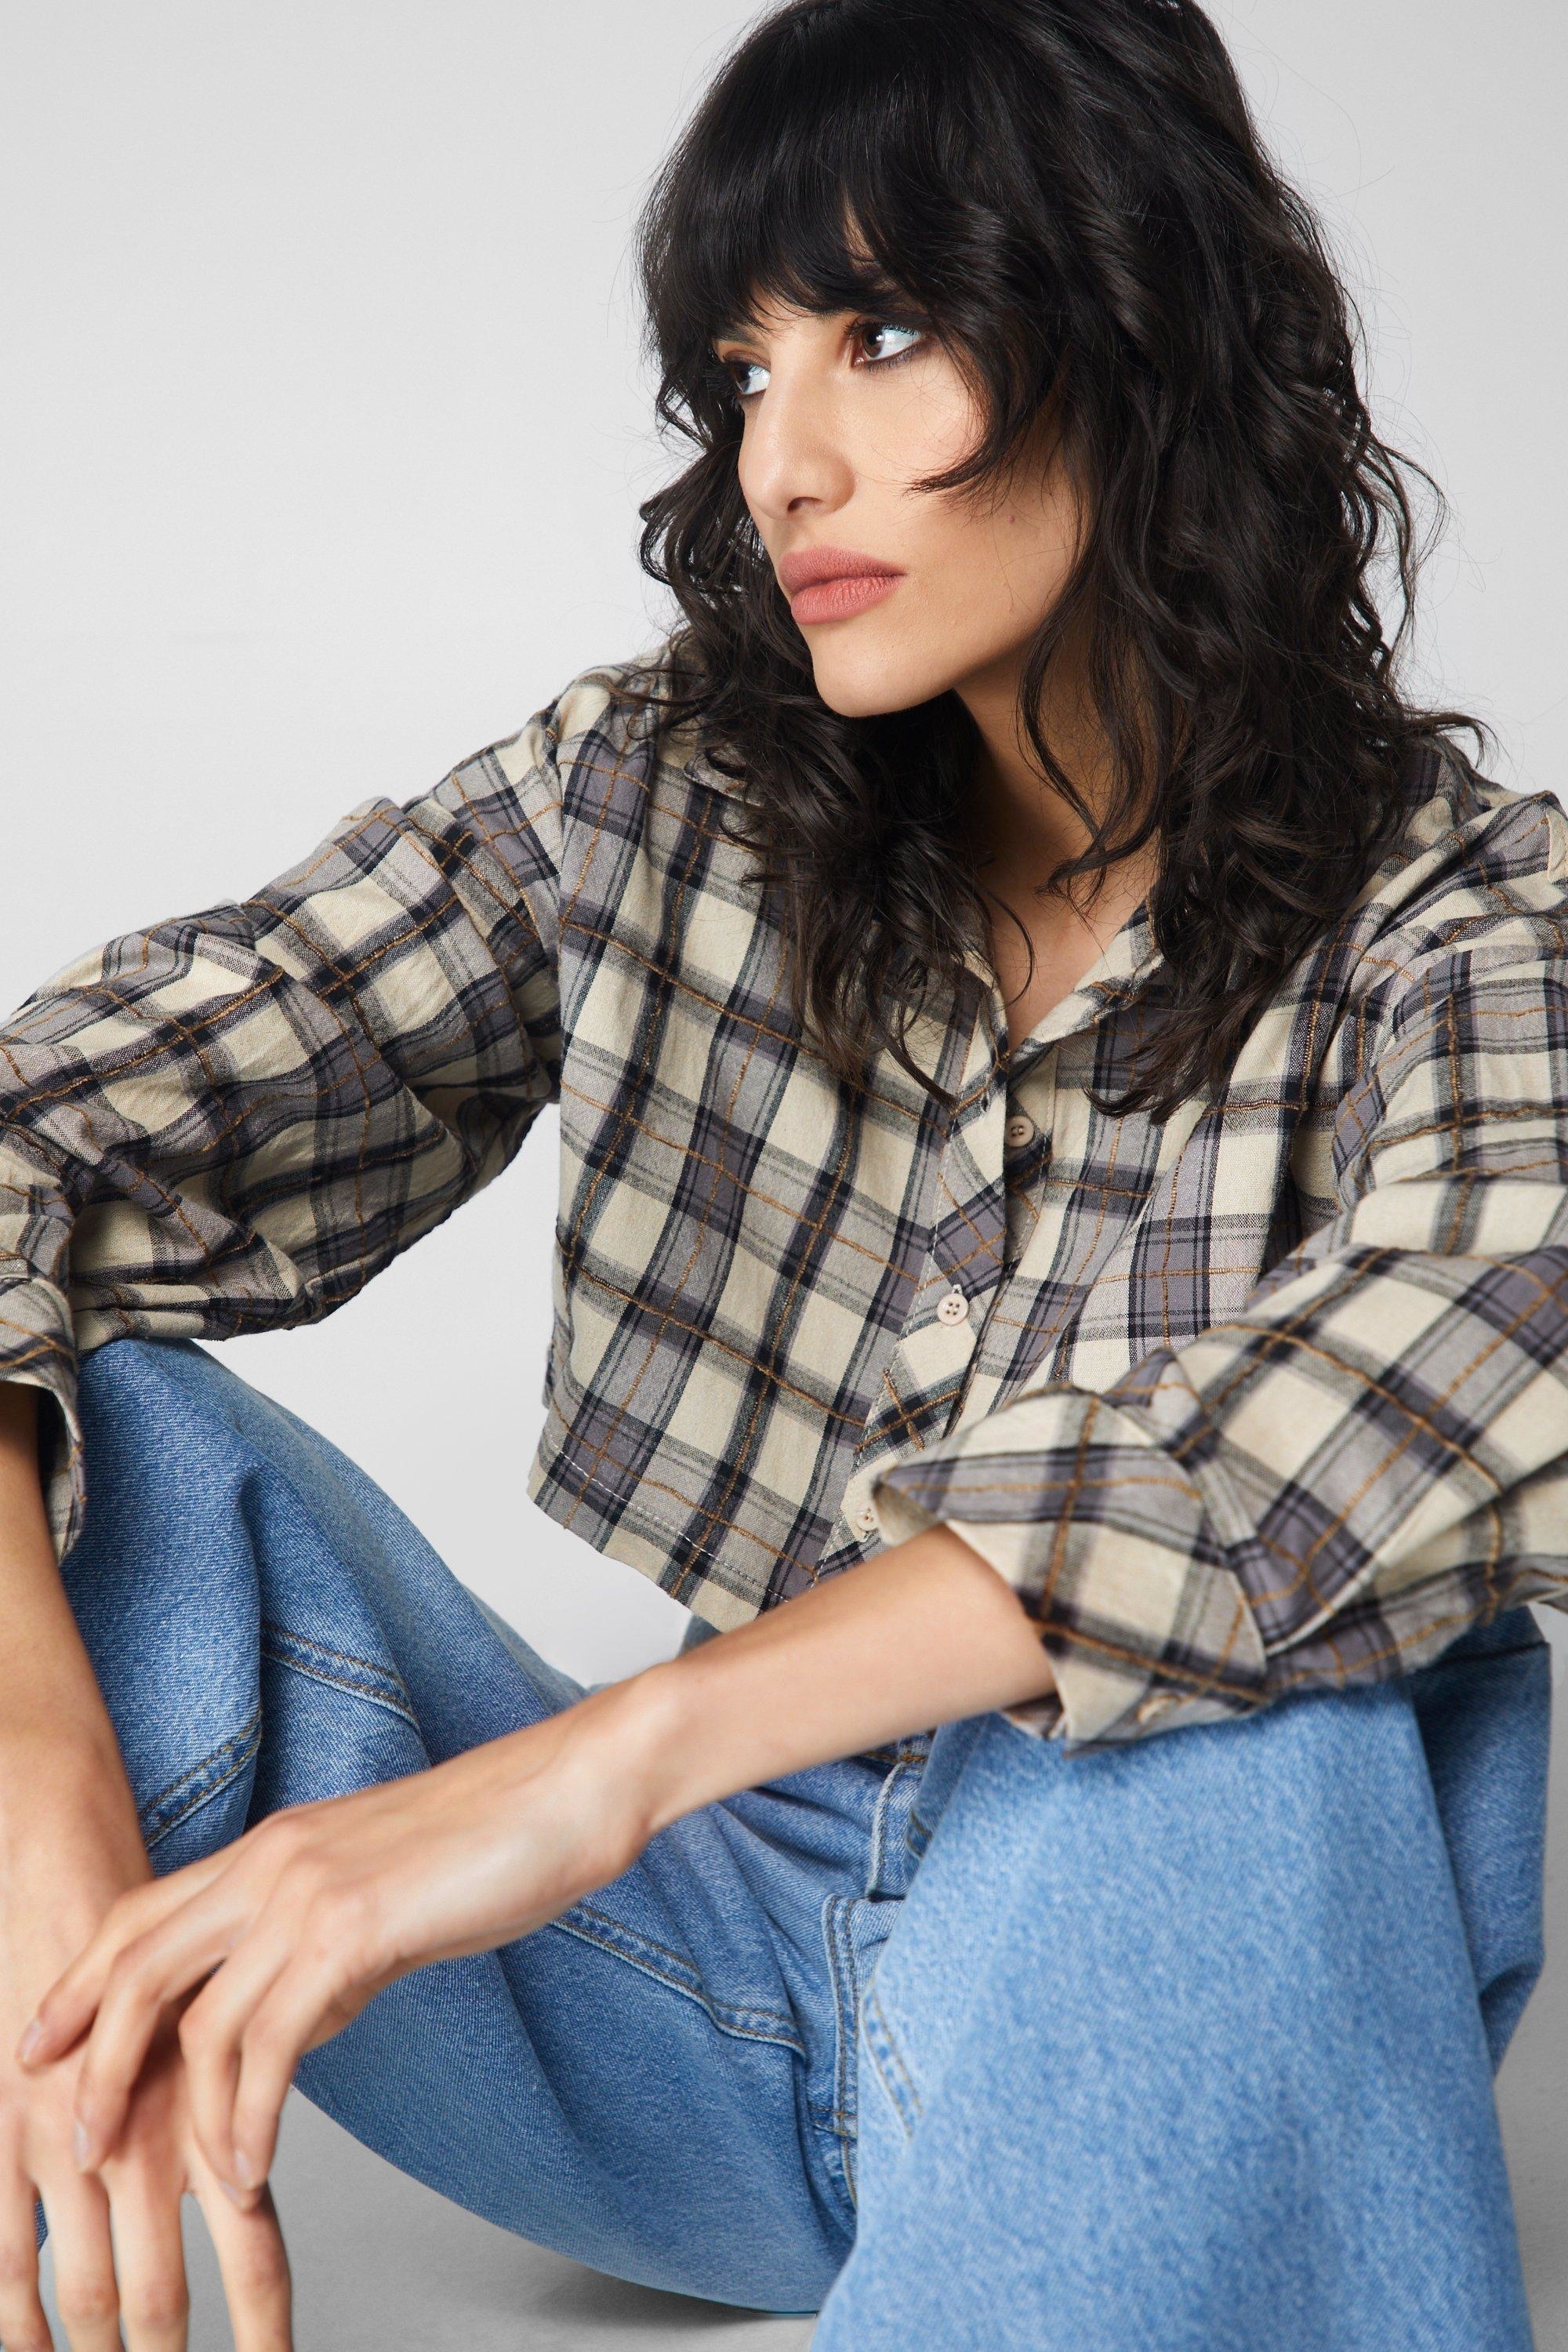 model in plaid shirt and denim jeans looking to the side